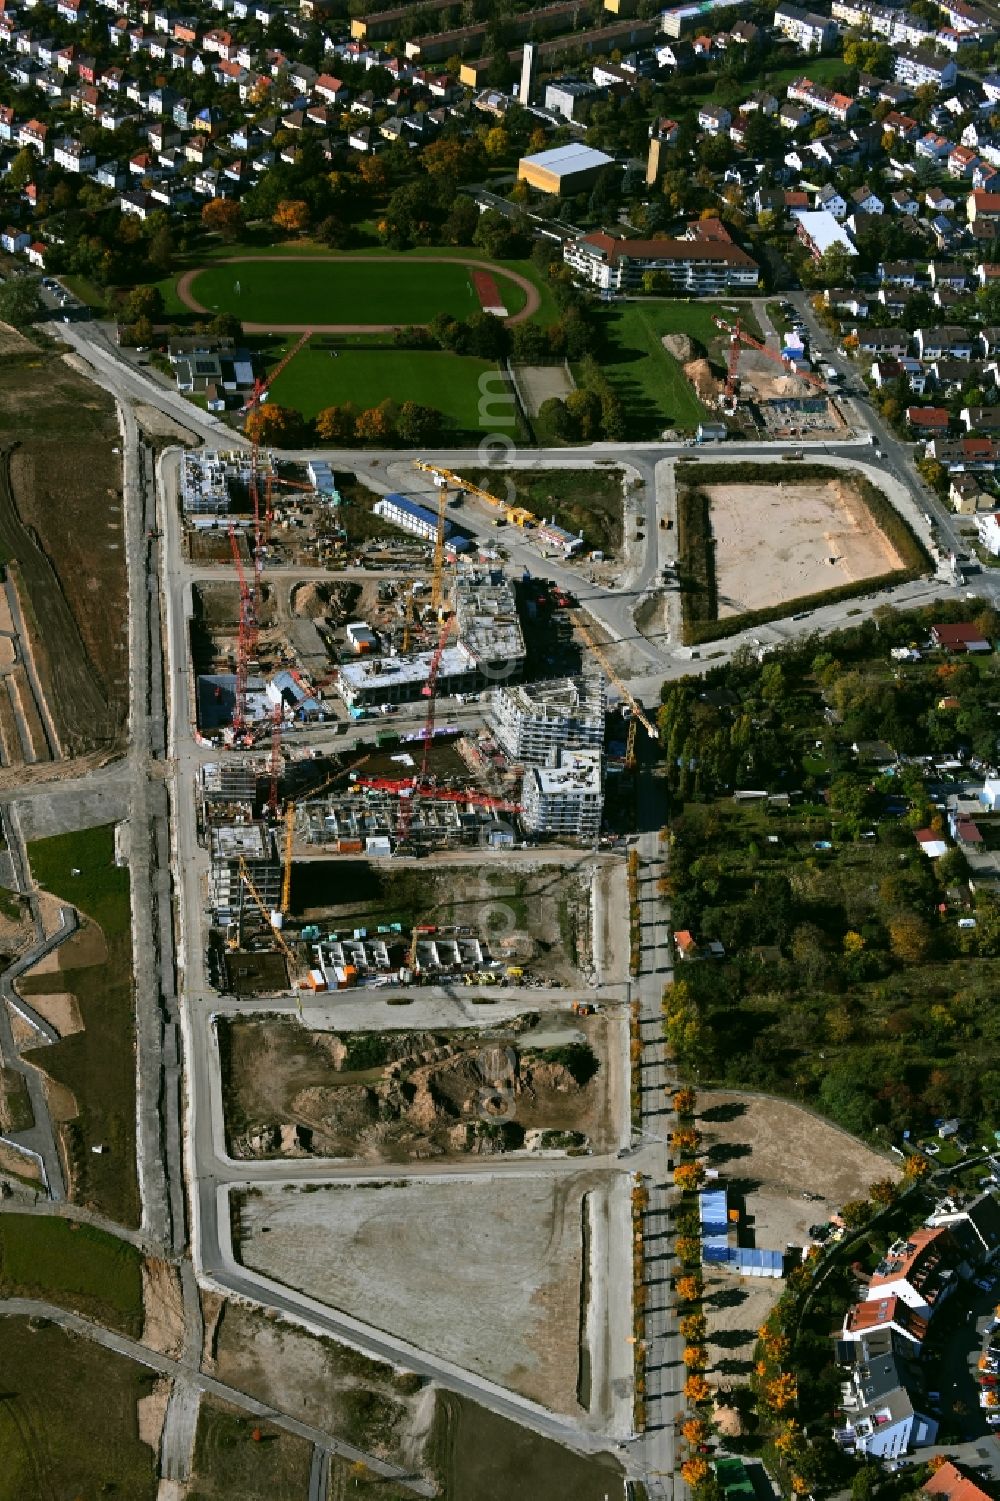 Aerial image Mannheim - Construction site to build a new multi-family residential complex Quartiere Bumerang - Wohnen am Park - FLAIRWOOD und Spinelli 10.5 on street Anna-Sammet-Strasse in the district Kaefertal in Mannheim in the state Baden-Wuerttemberg, Germany